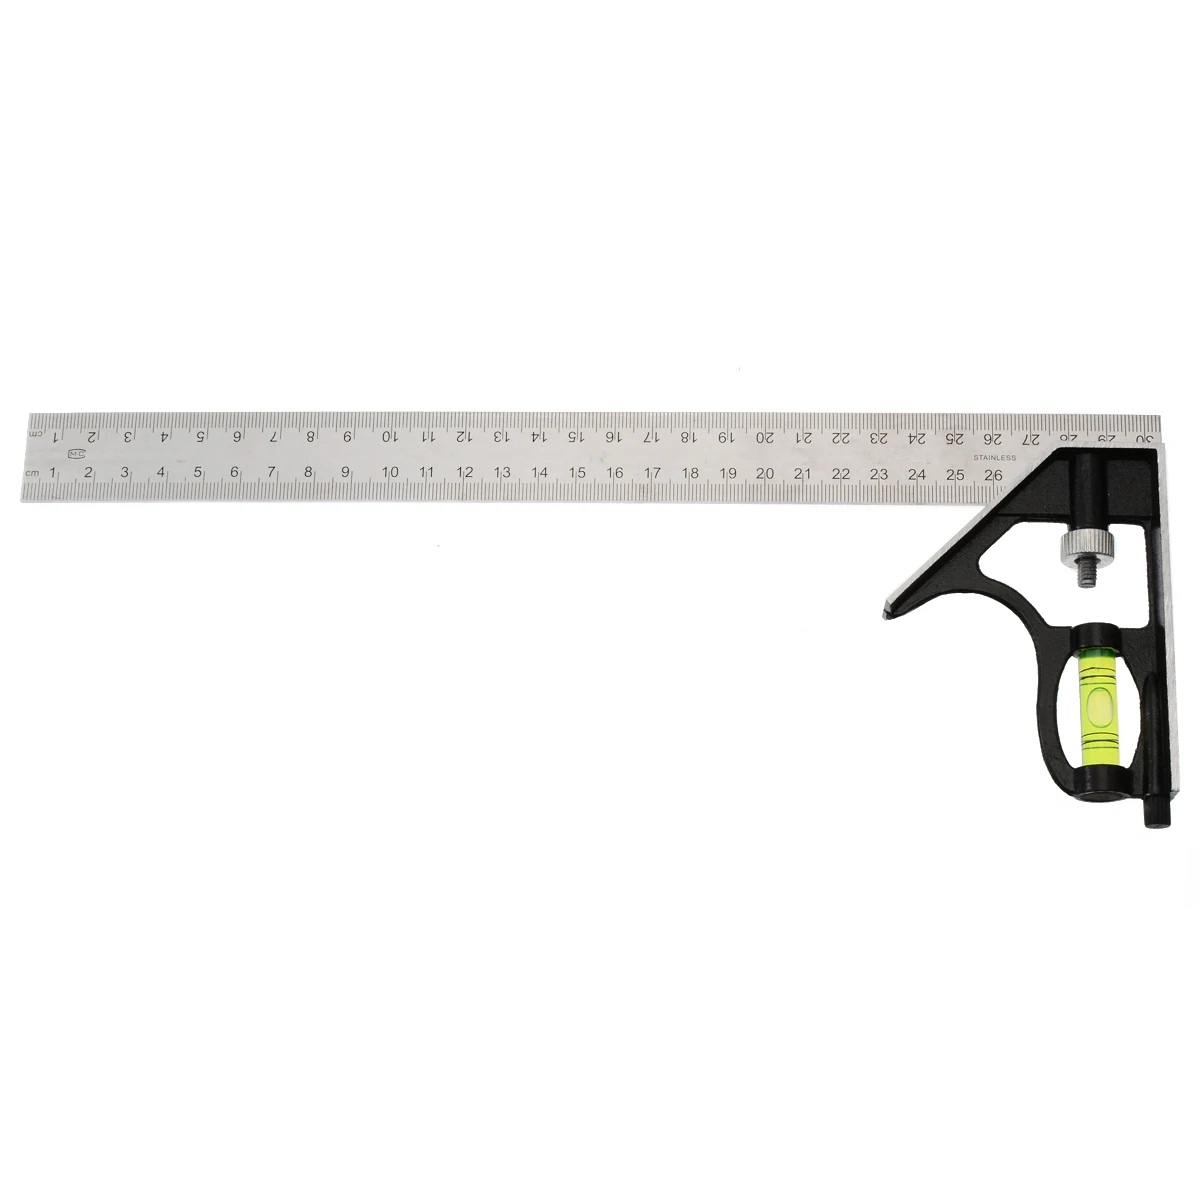 Aluminum steel 300mm/12" Engineers Try Square Set Right Angle Guide With Level 